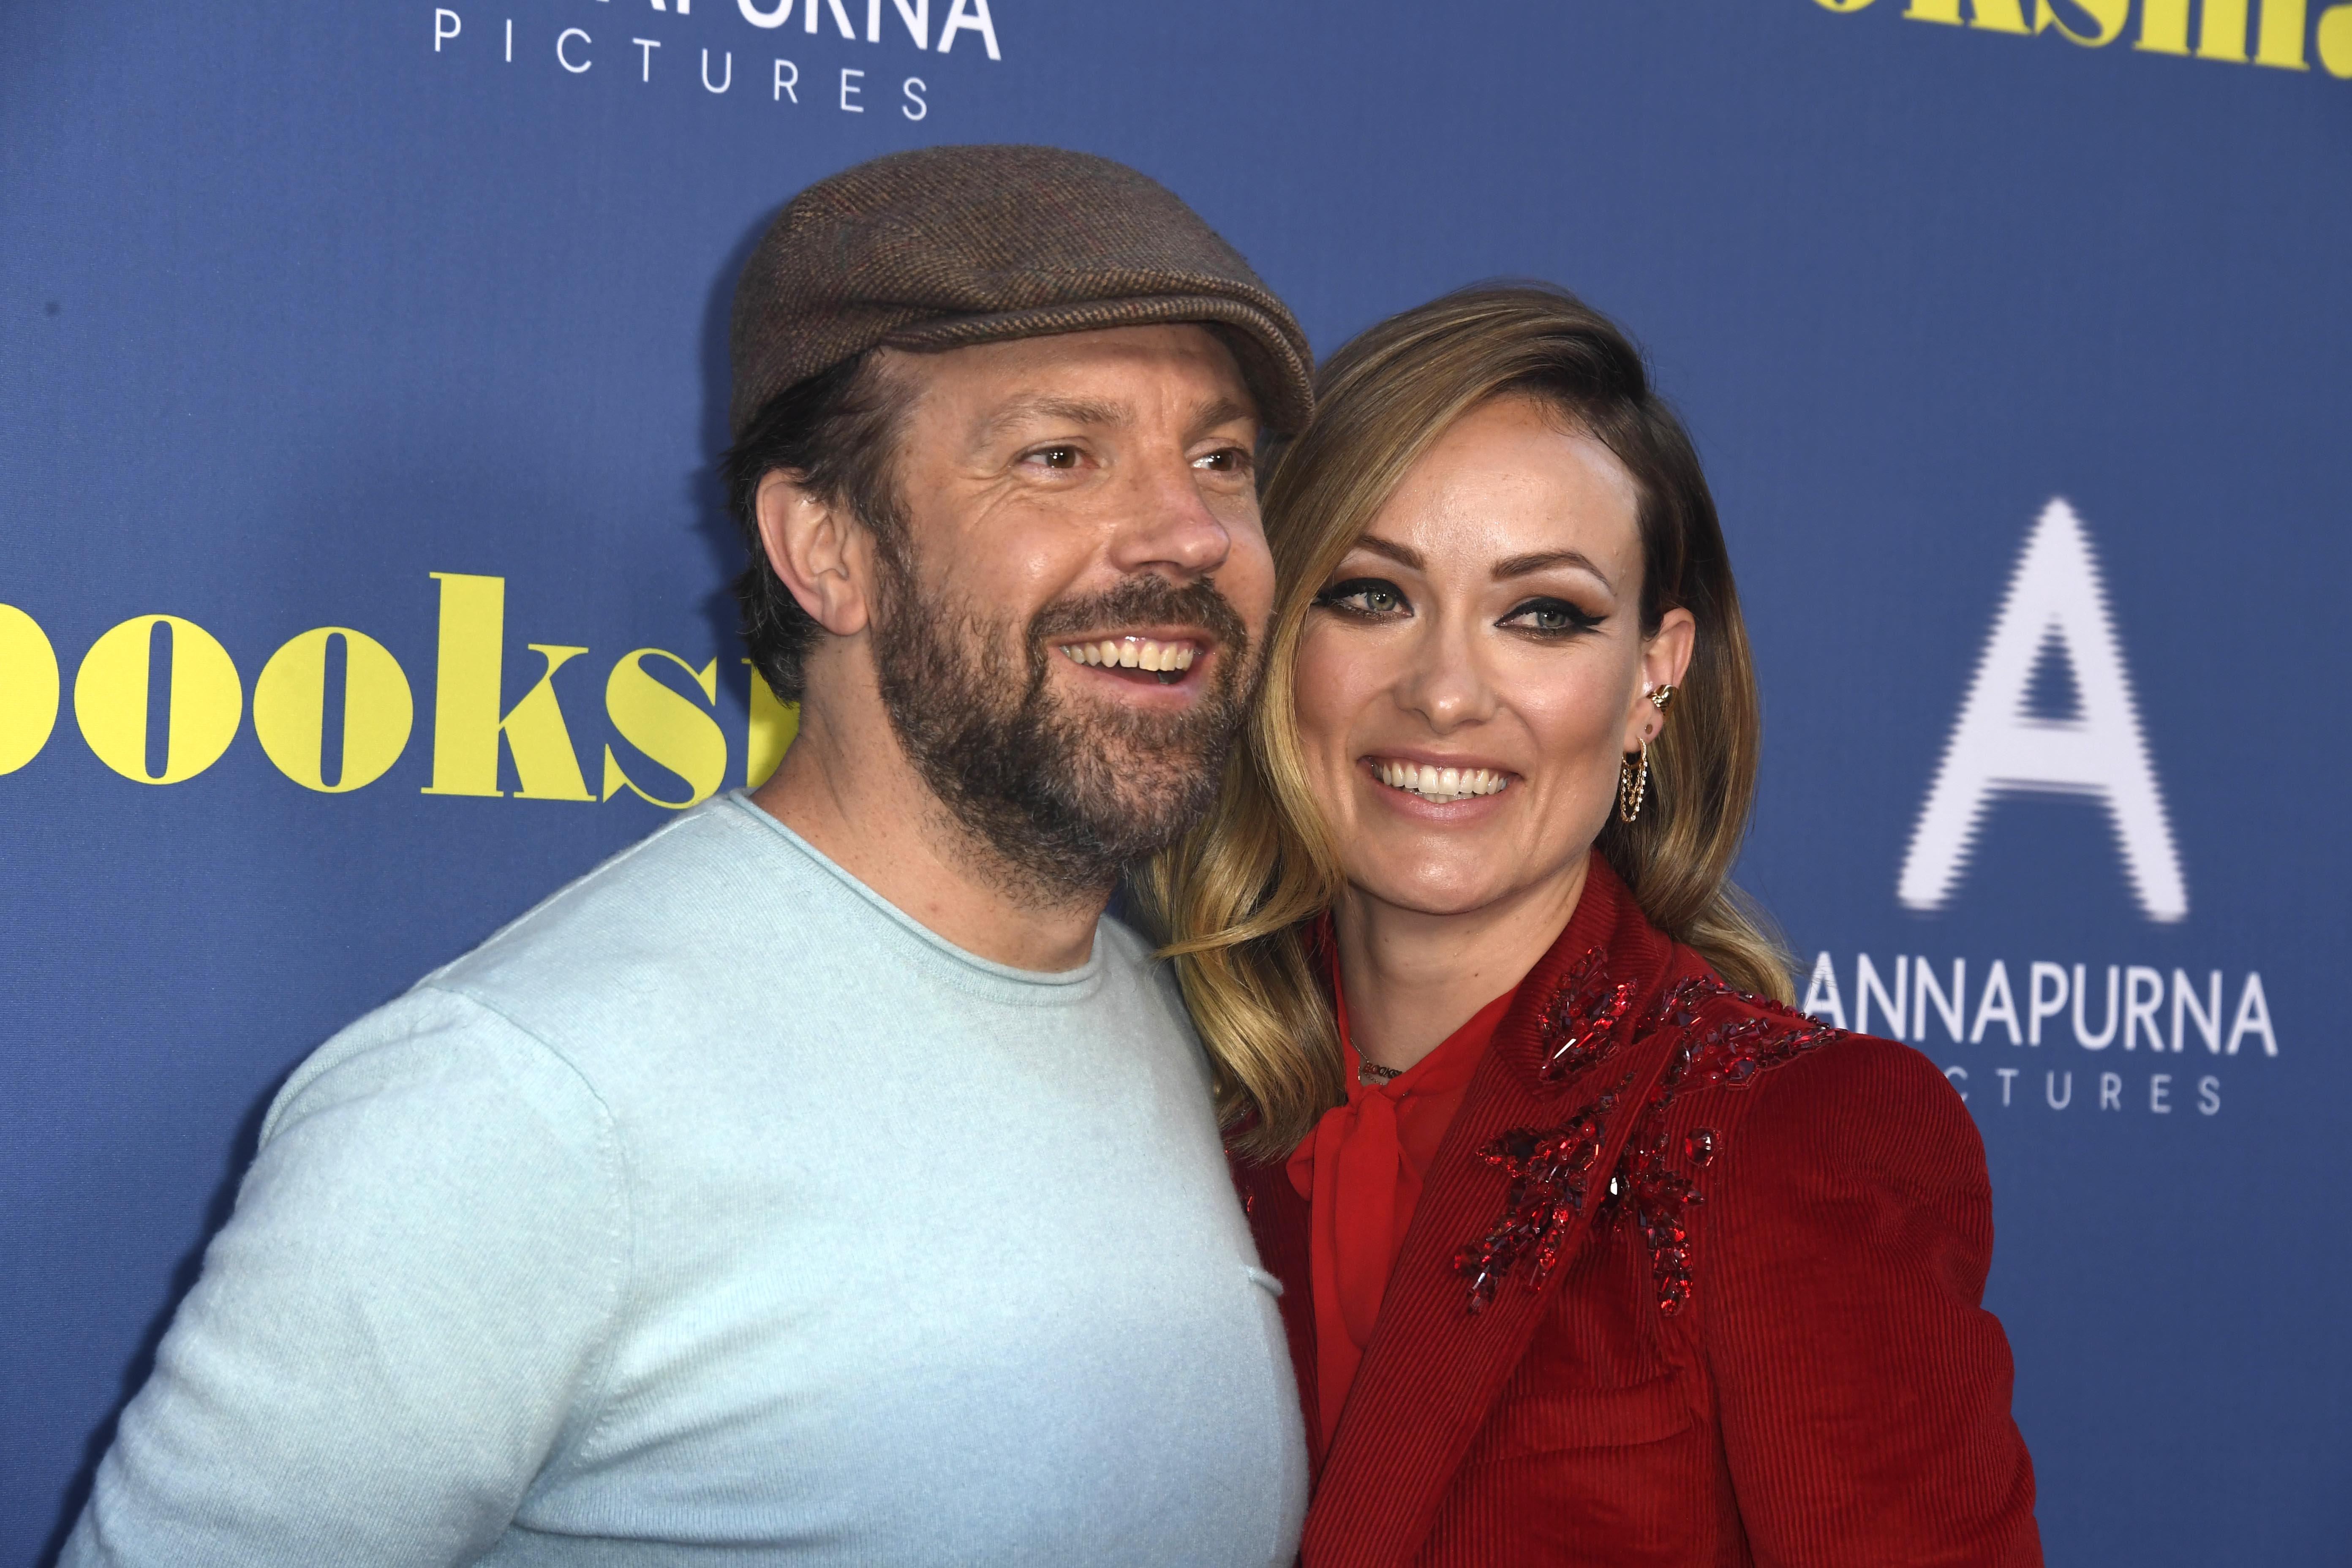 (L-R) Jason Sudeikis and Olivia Wilde attend LA Special Screening Of Annapurna Pictures' 'Booksmart' on May 13, 2019 